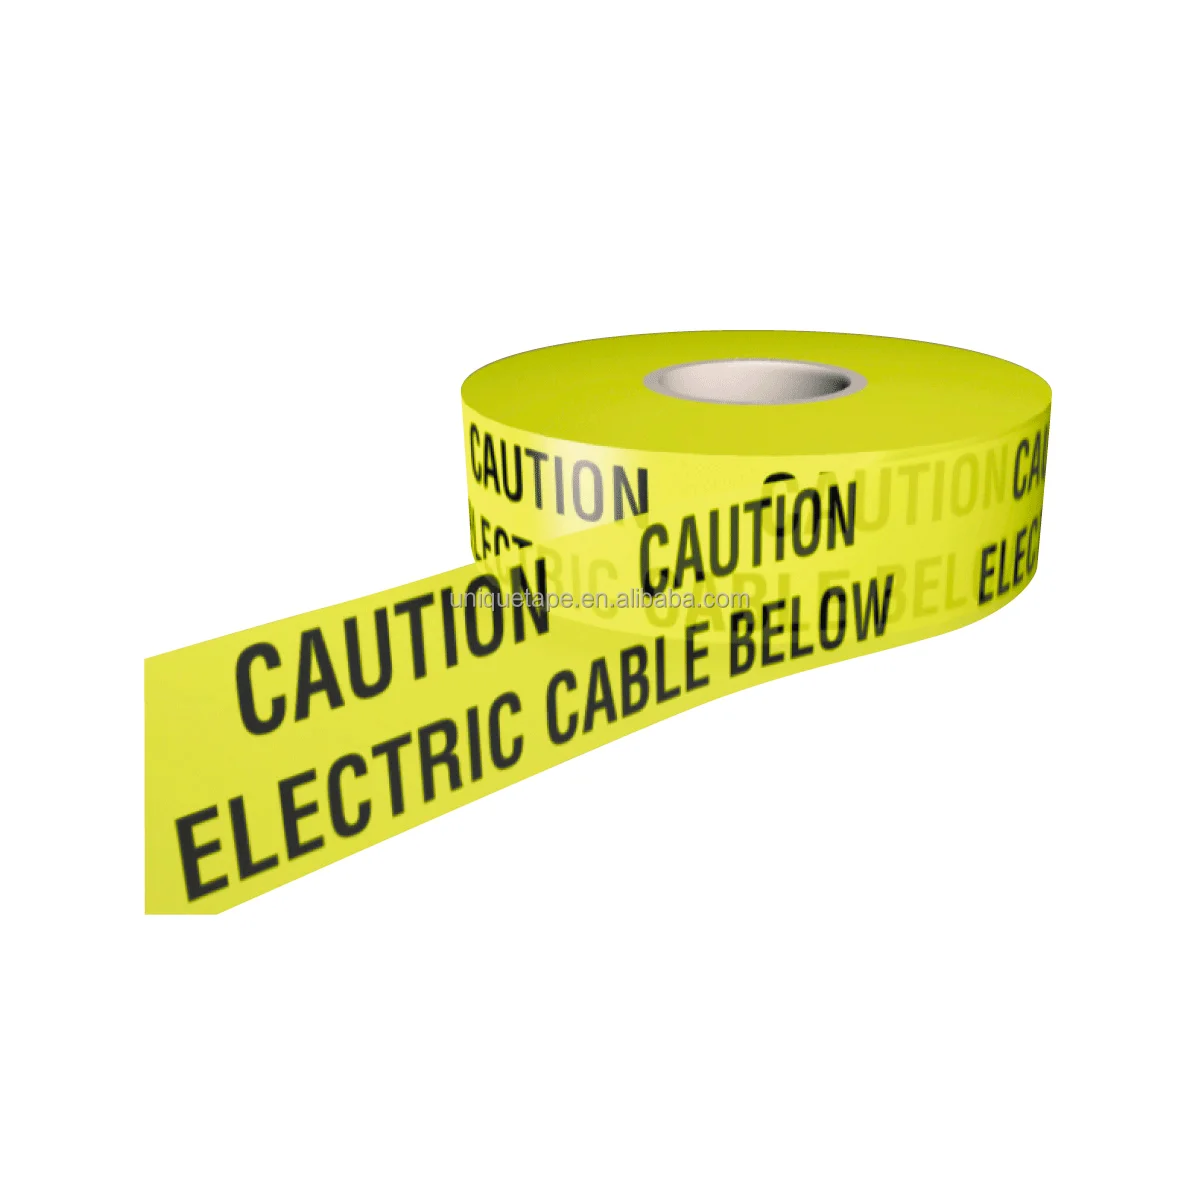 30m LENGTH CAUTION ELECTRIC CABLE BELOW WARNING TAPE 